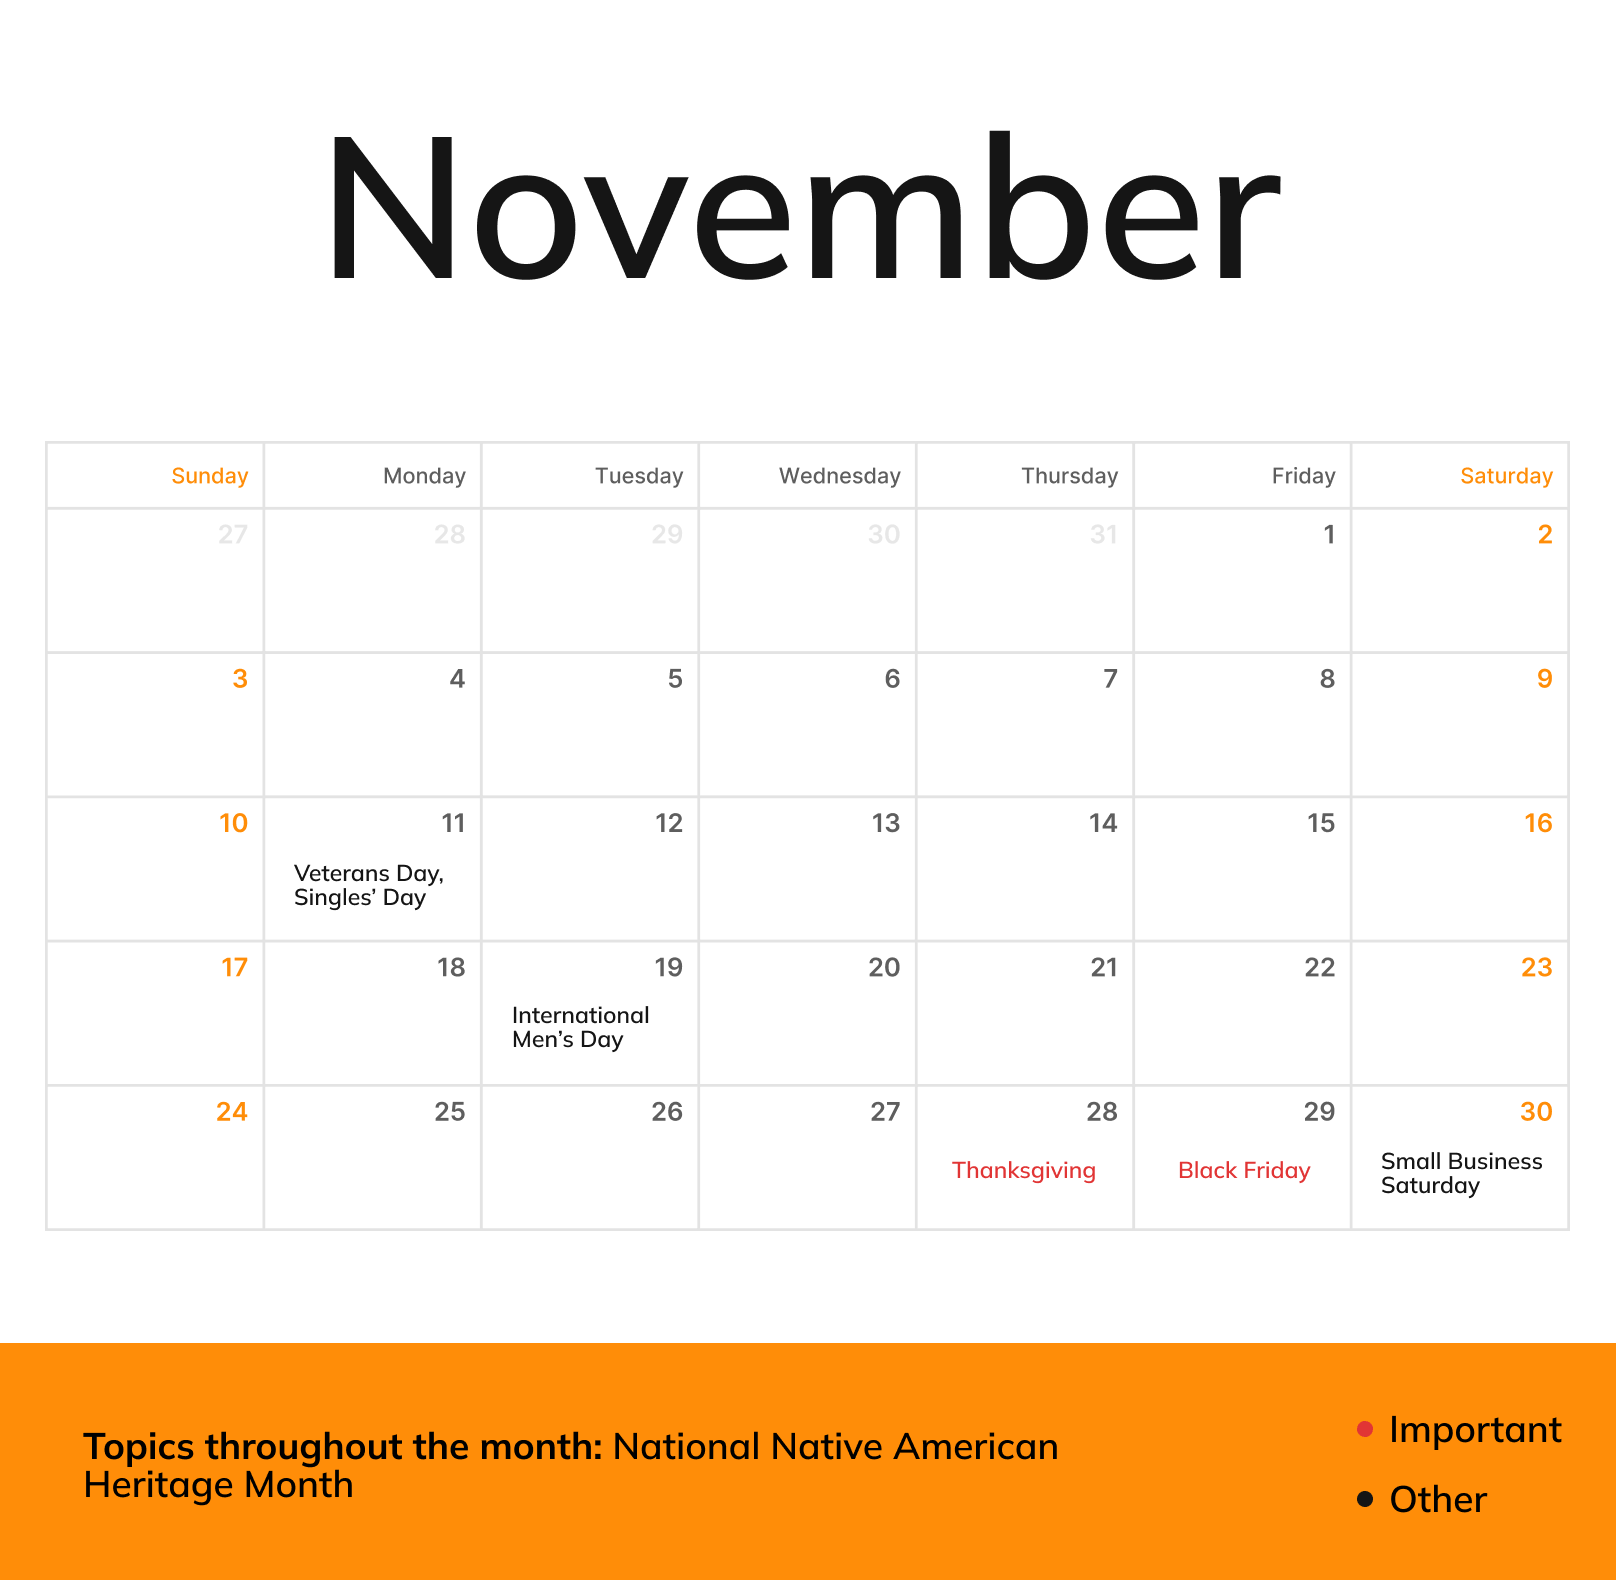 A November monthly calendar with holidays and topics throughout the month being National Native American Heritage Month